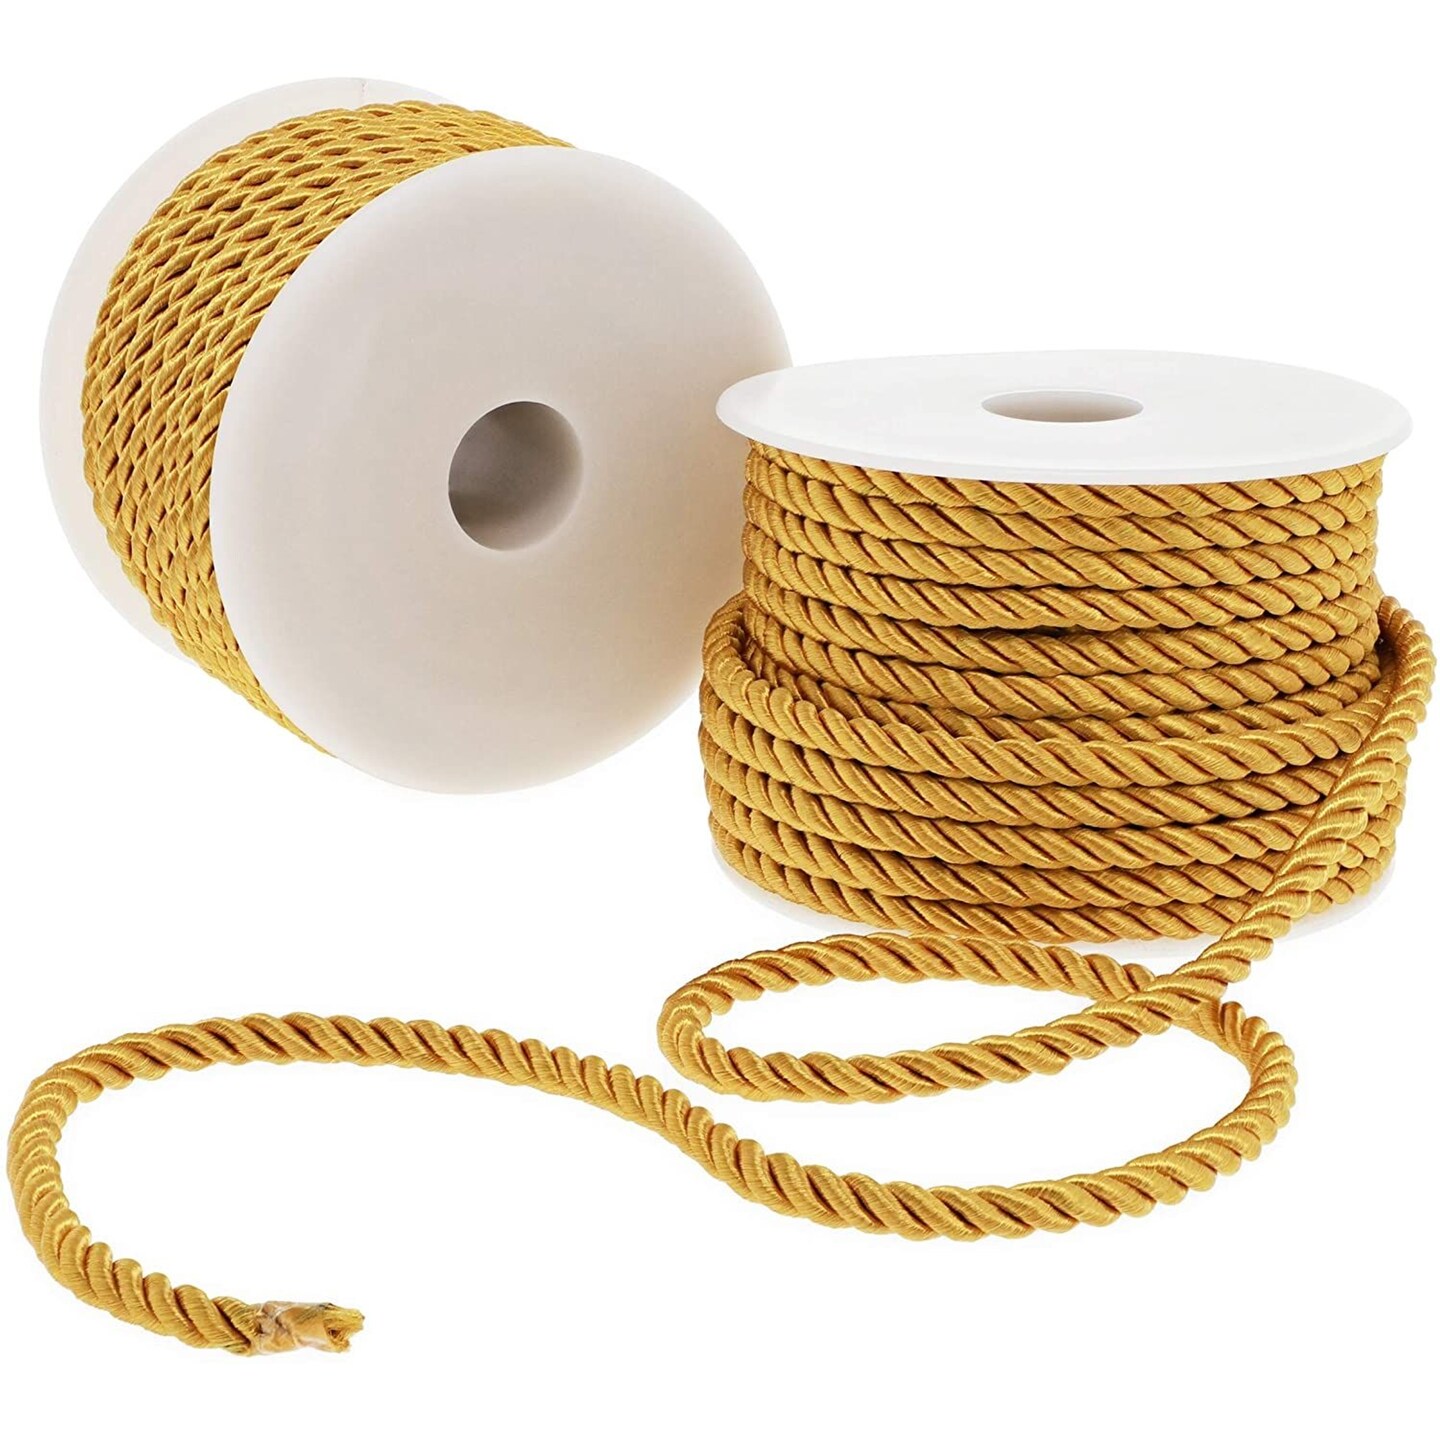 Twisted Gold Cord for Crafts, Sewing, Upholstery (36 Yards, 2